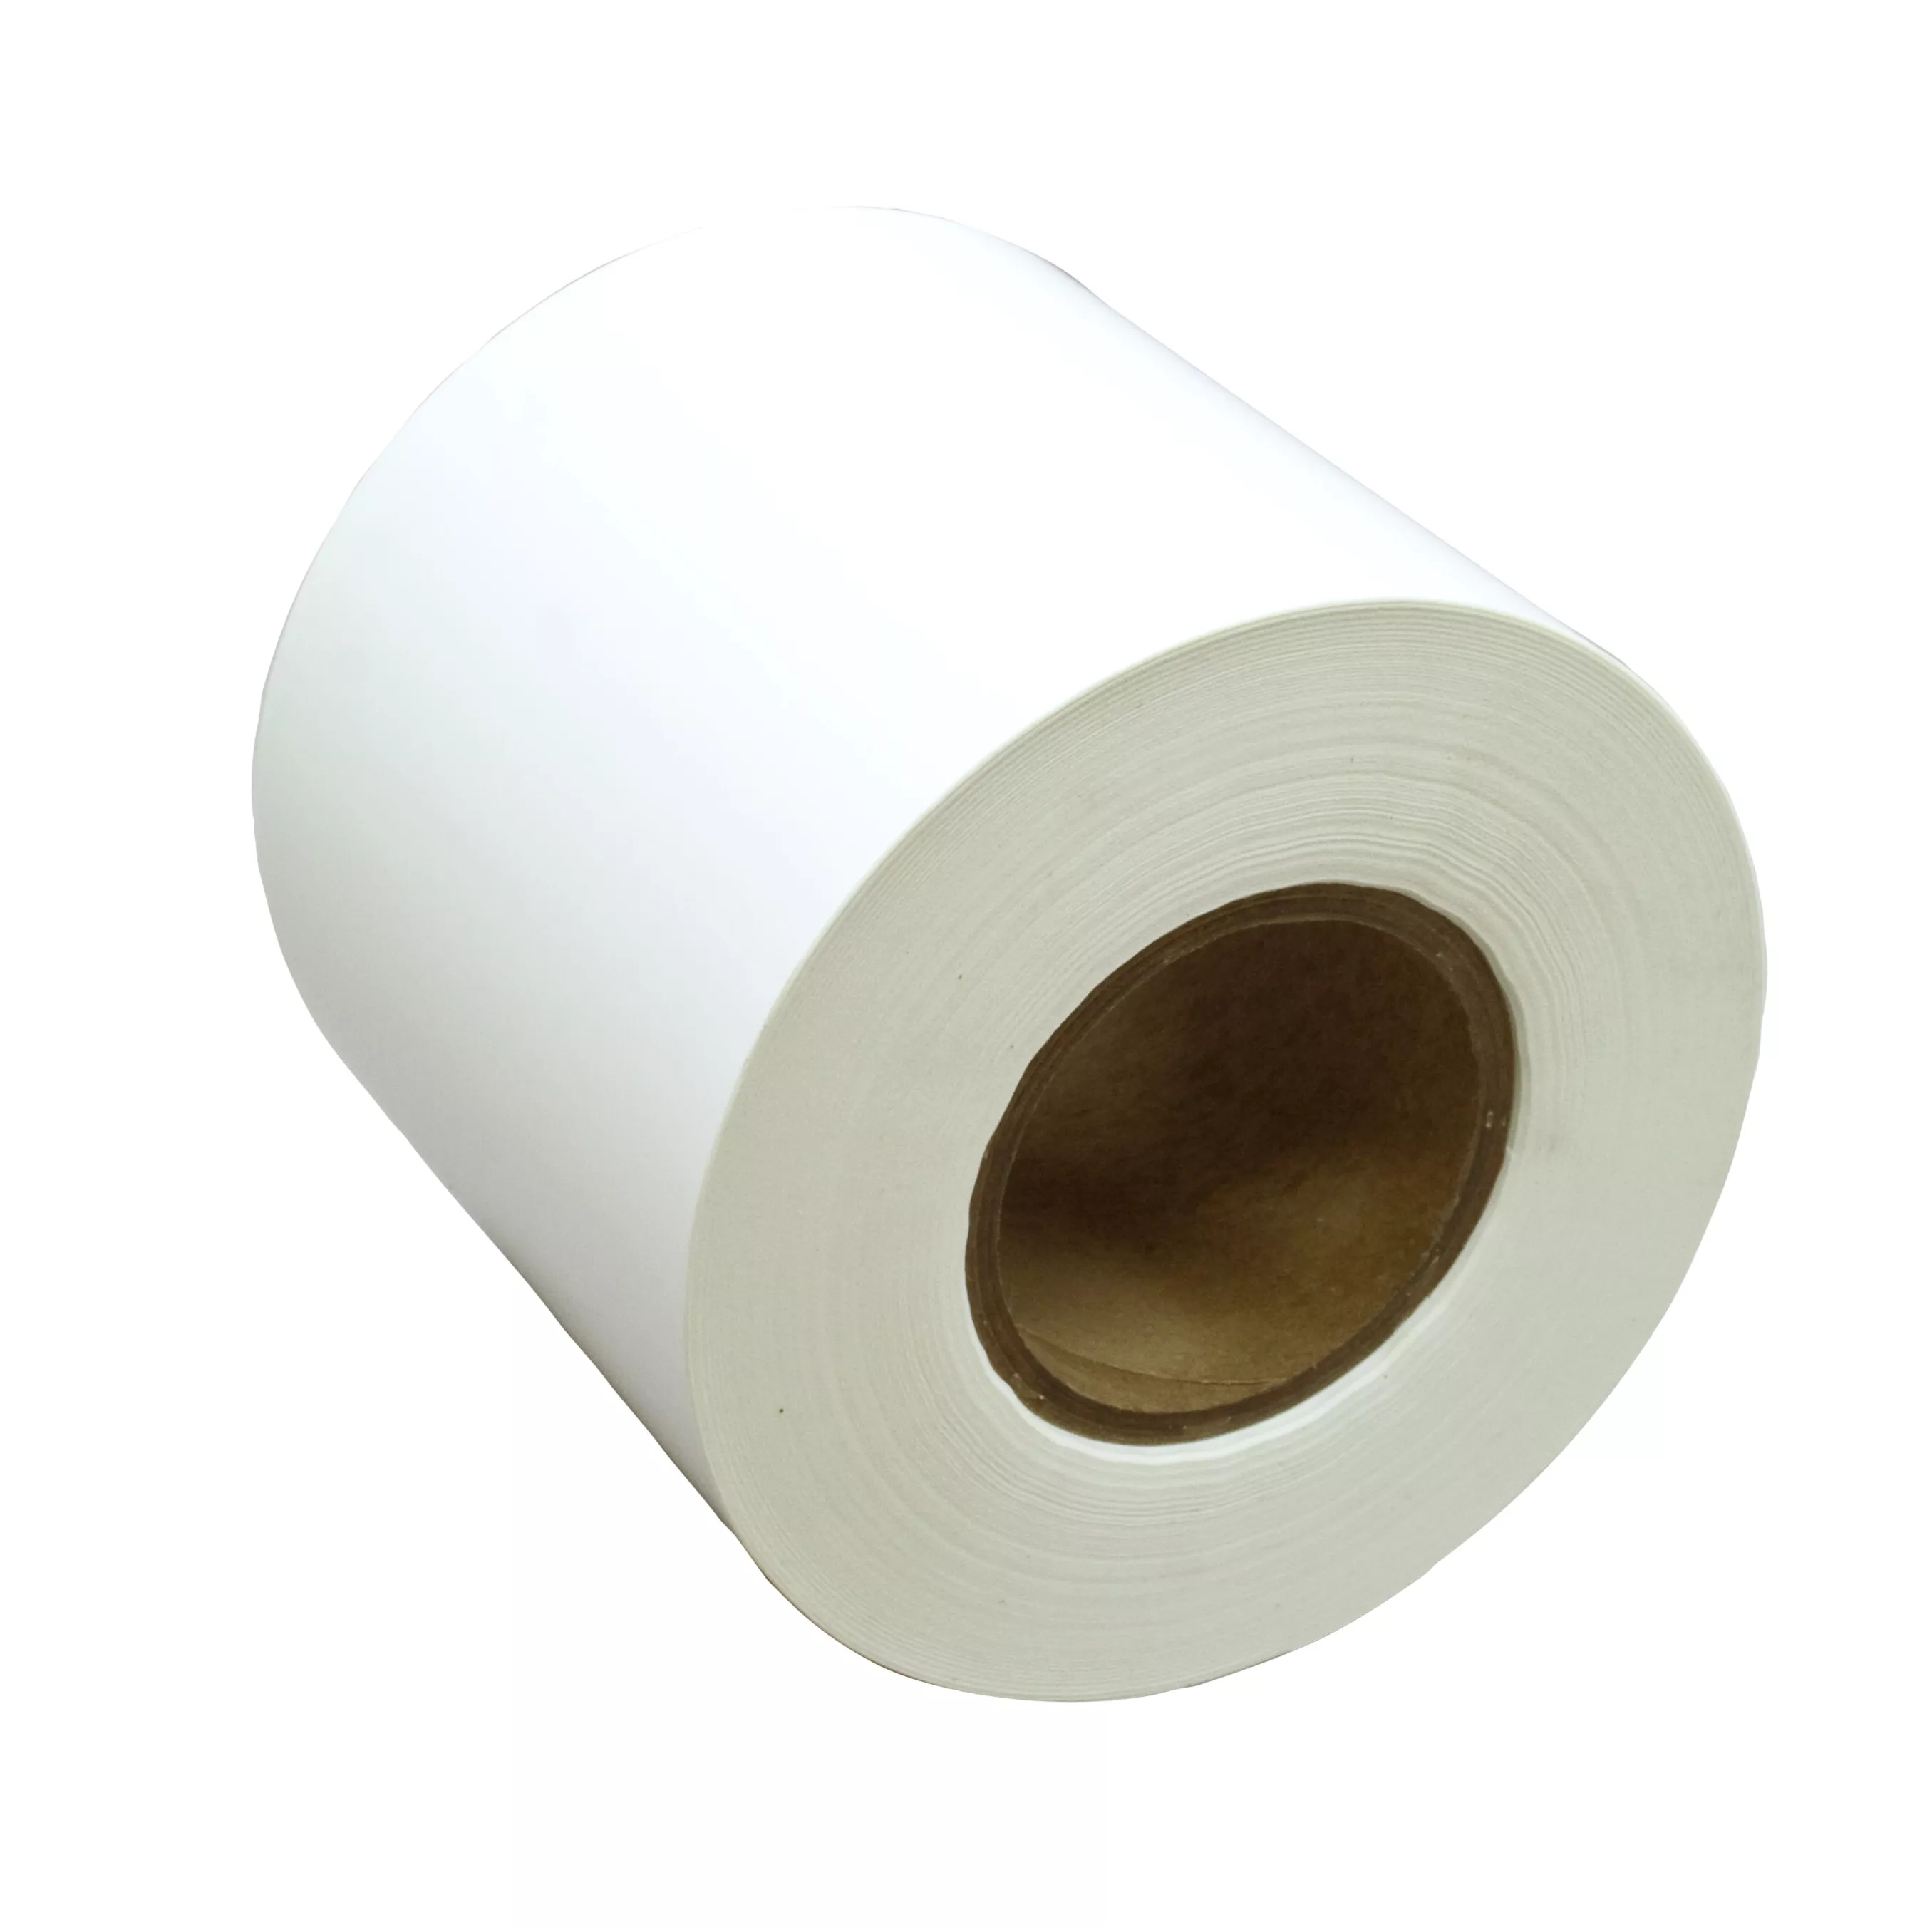 3M™ Thermal Transfer Label Material 7246, Matte White Polyester, 6 in x
1668 ft, 1 Roll/Case